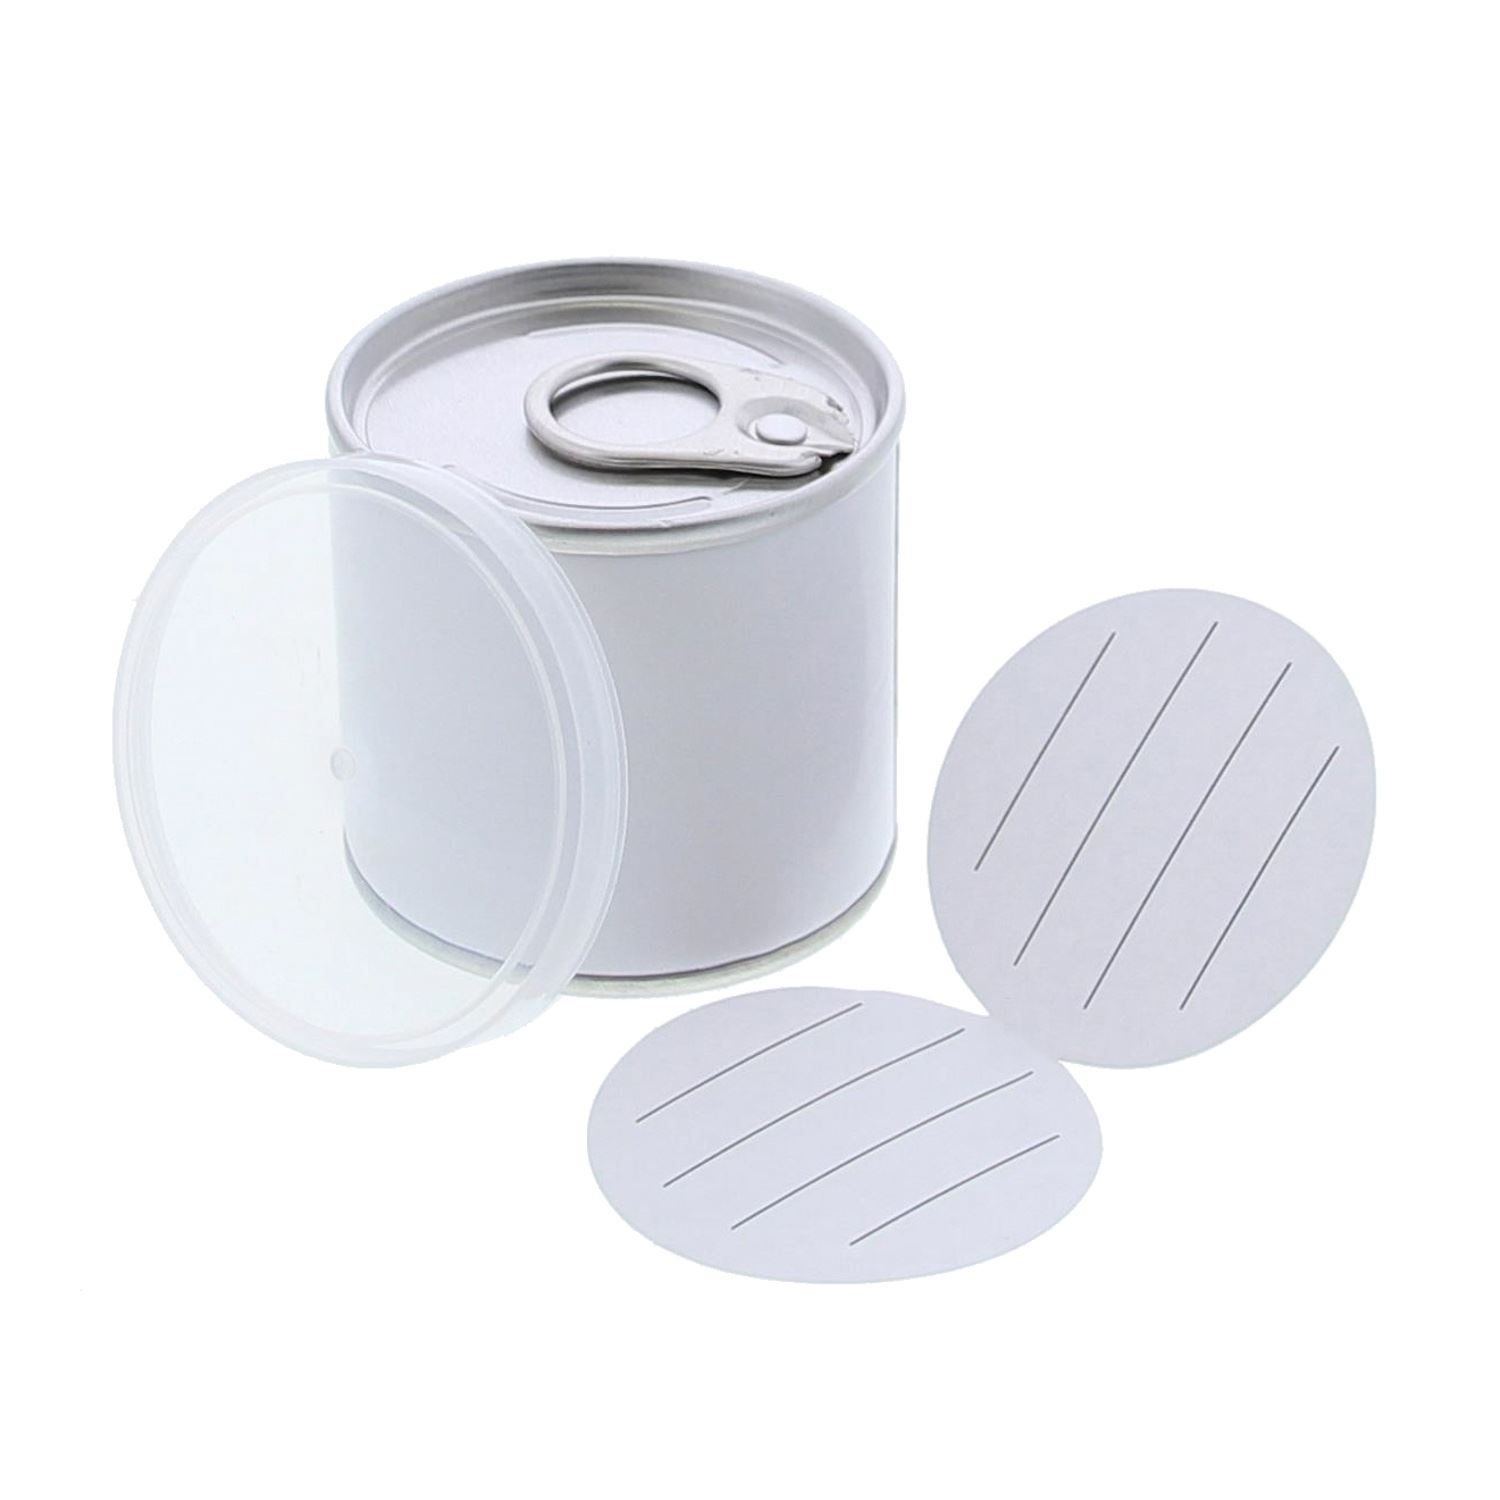 Can of neutral white - 24 pieces